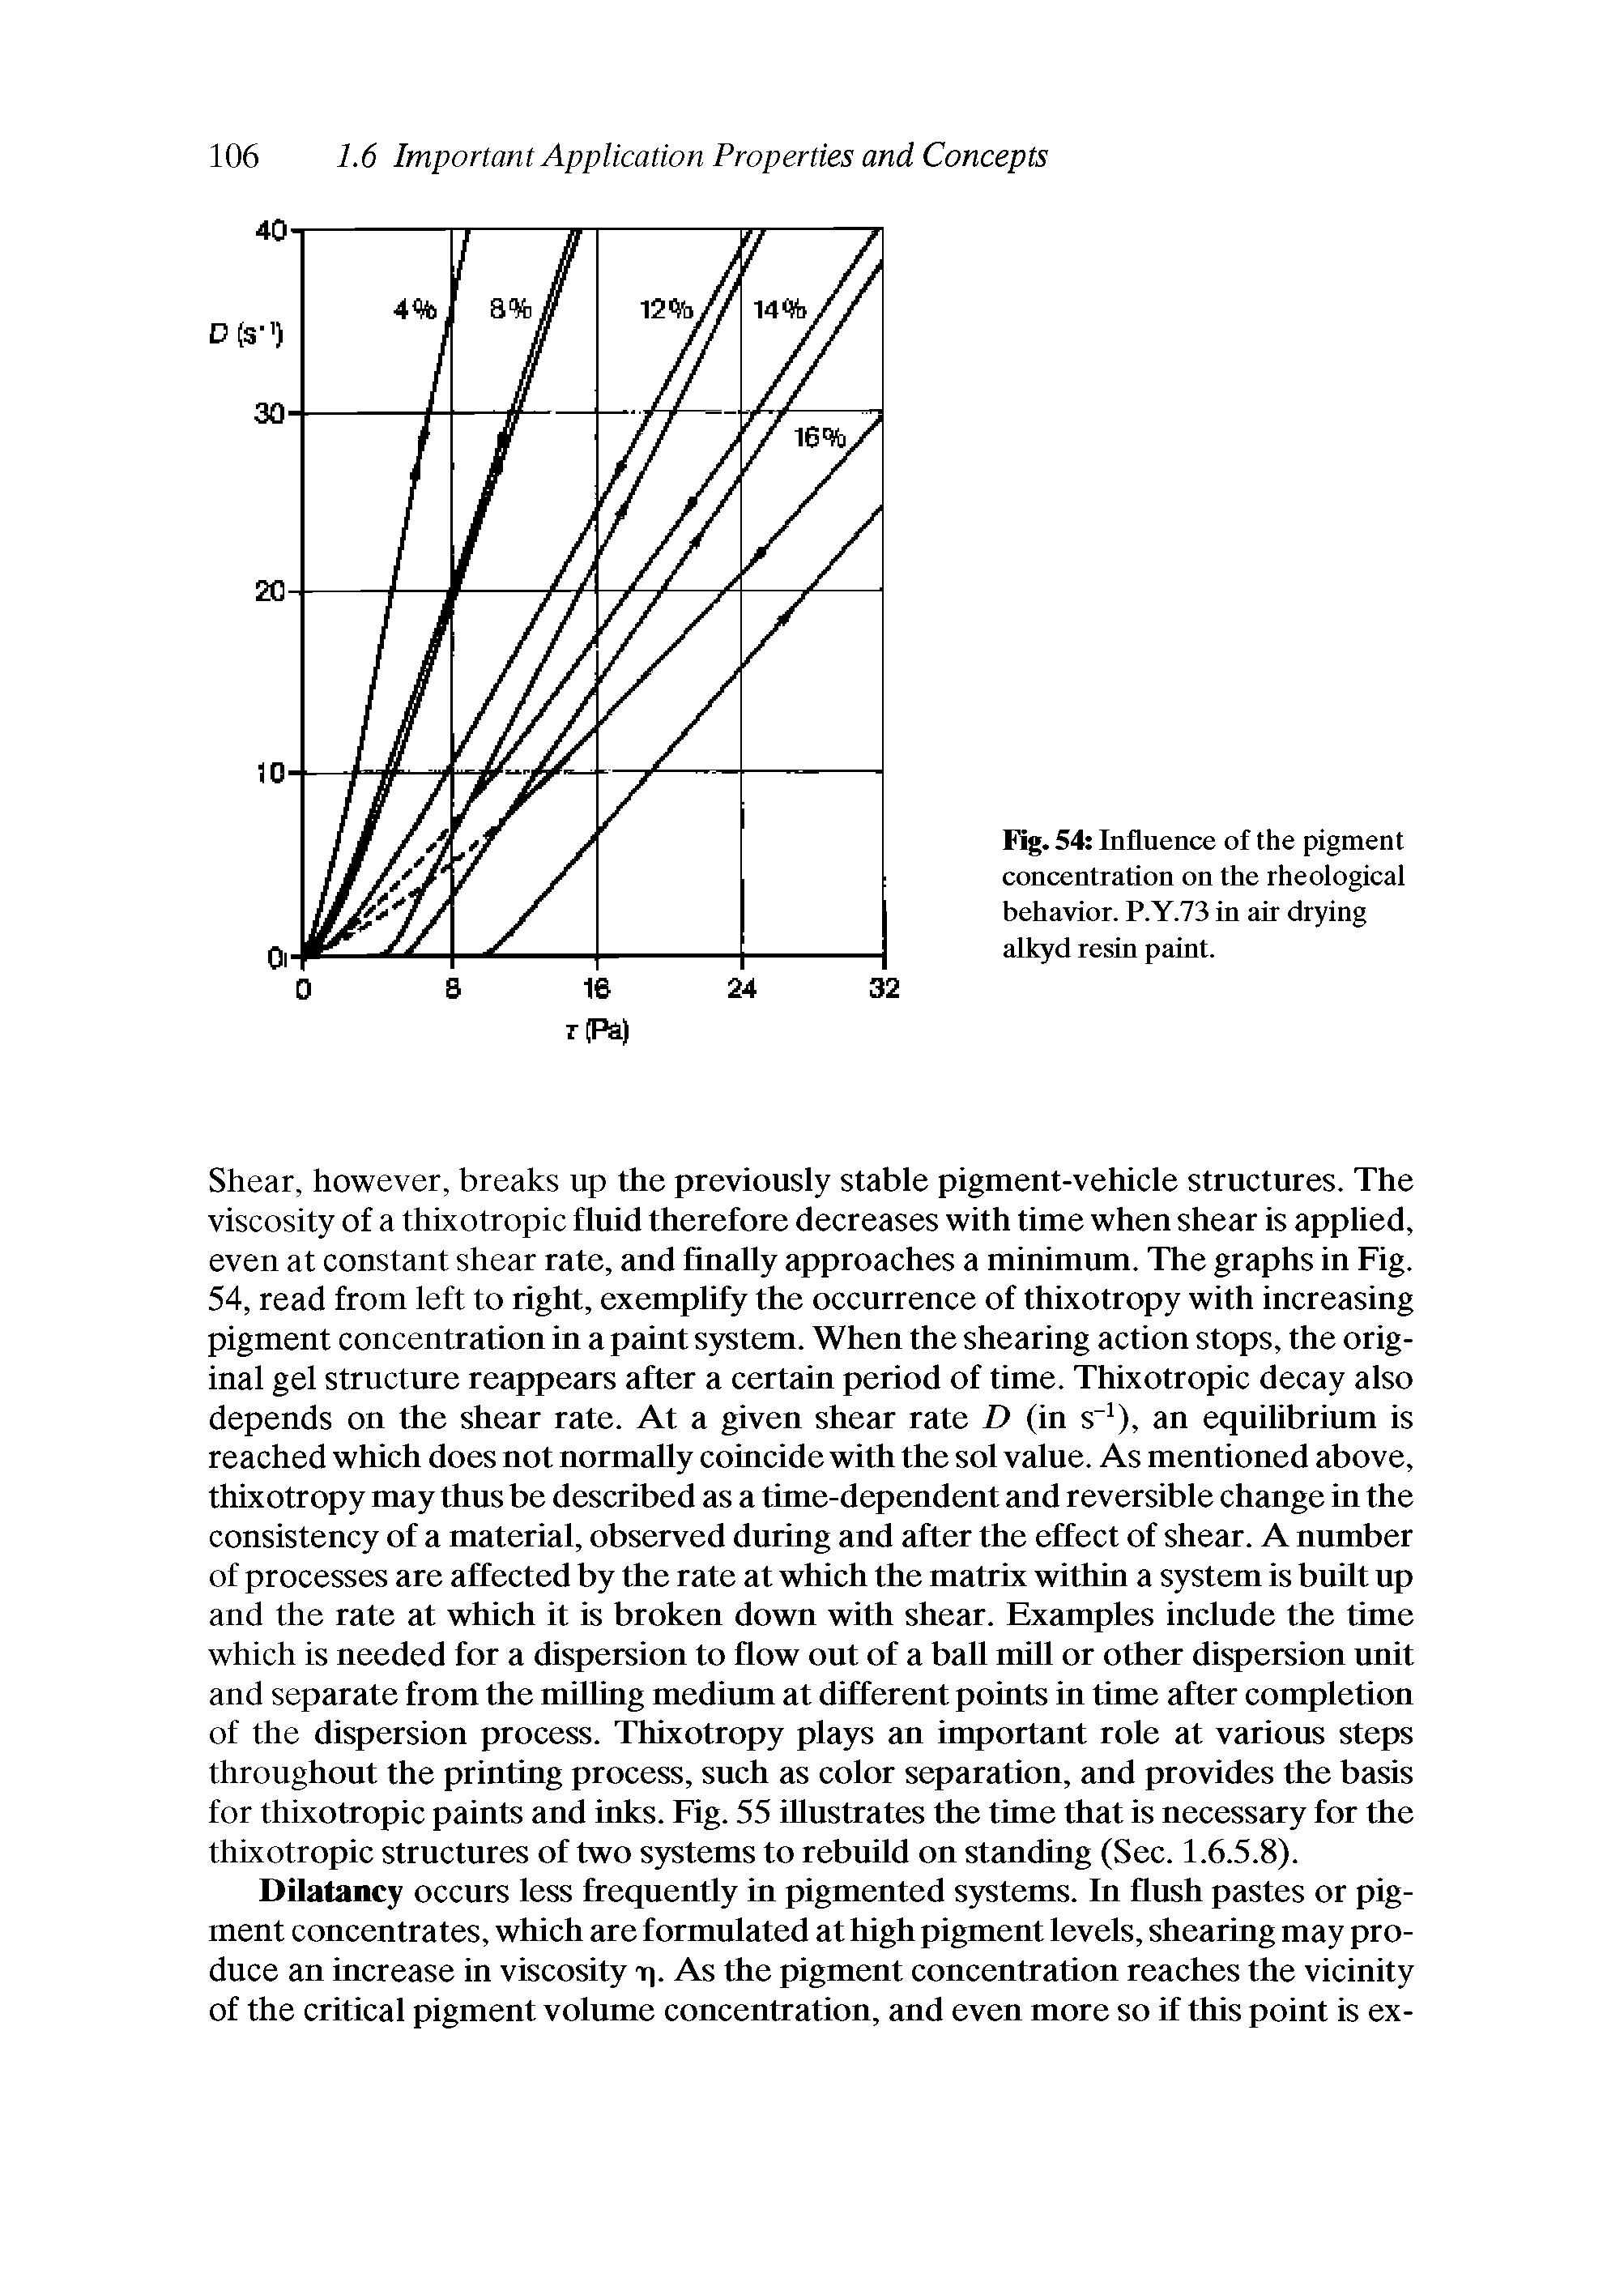 Fig. 54 Influence of the pigment concentration on the rheological behavior. P.Y.73 in air drying alkyd resin paint.